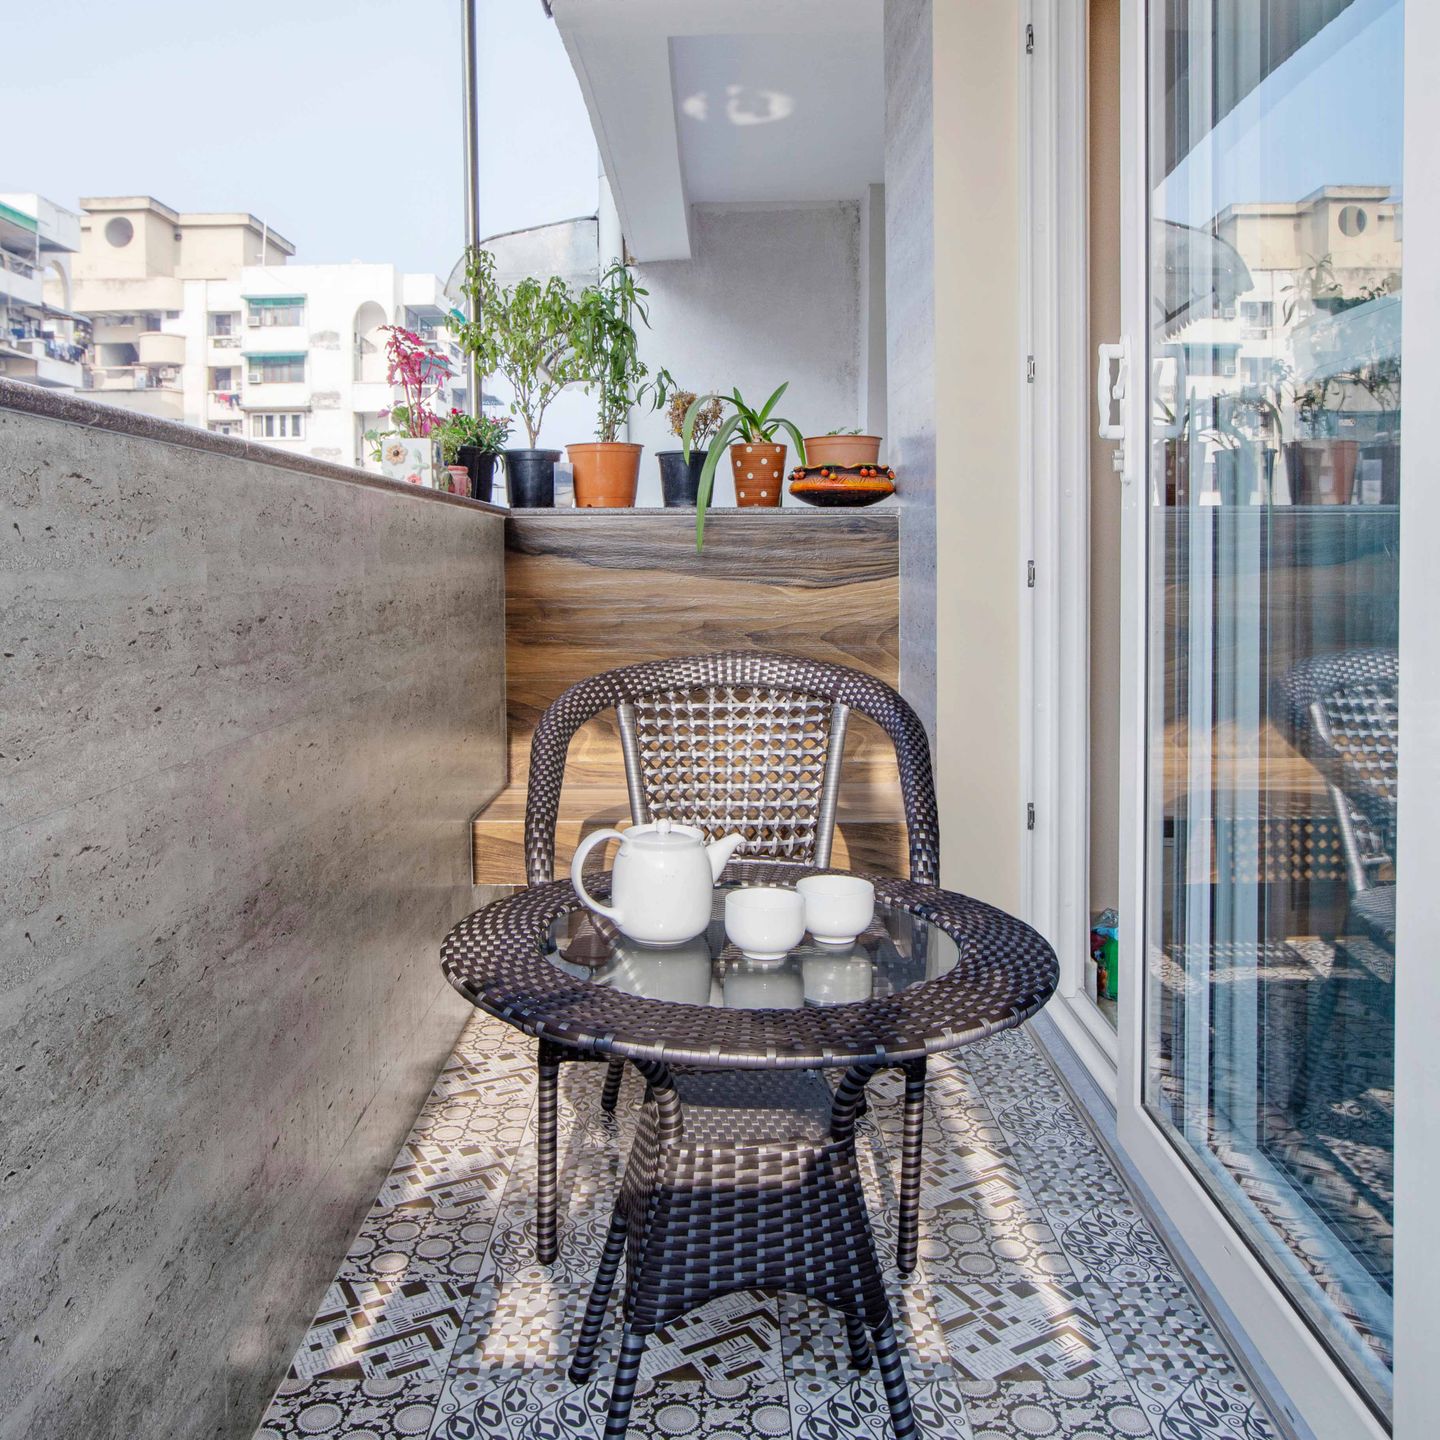 Eclectic Balcony Design with Wooden Wall Panel, Abstract Geometric Flooring, Rattan Seater, and Round Coffee Table -